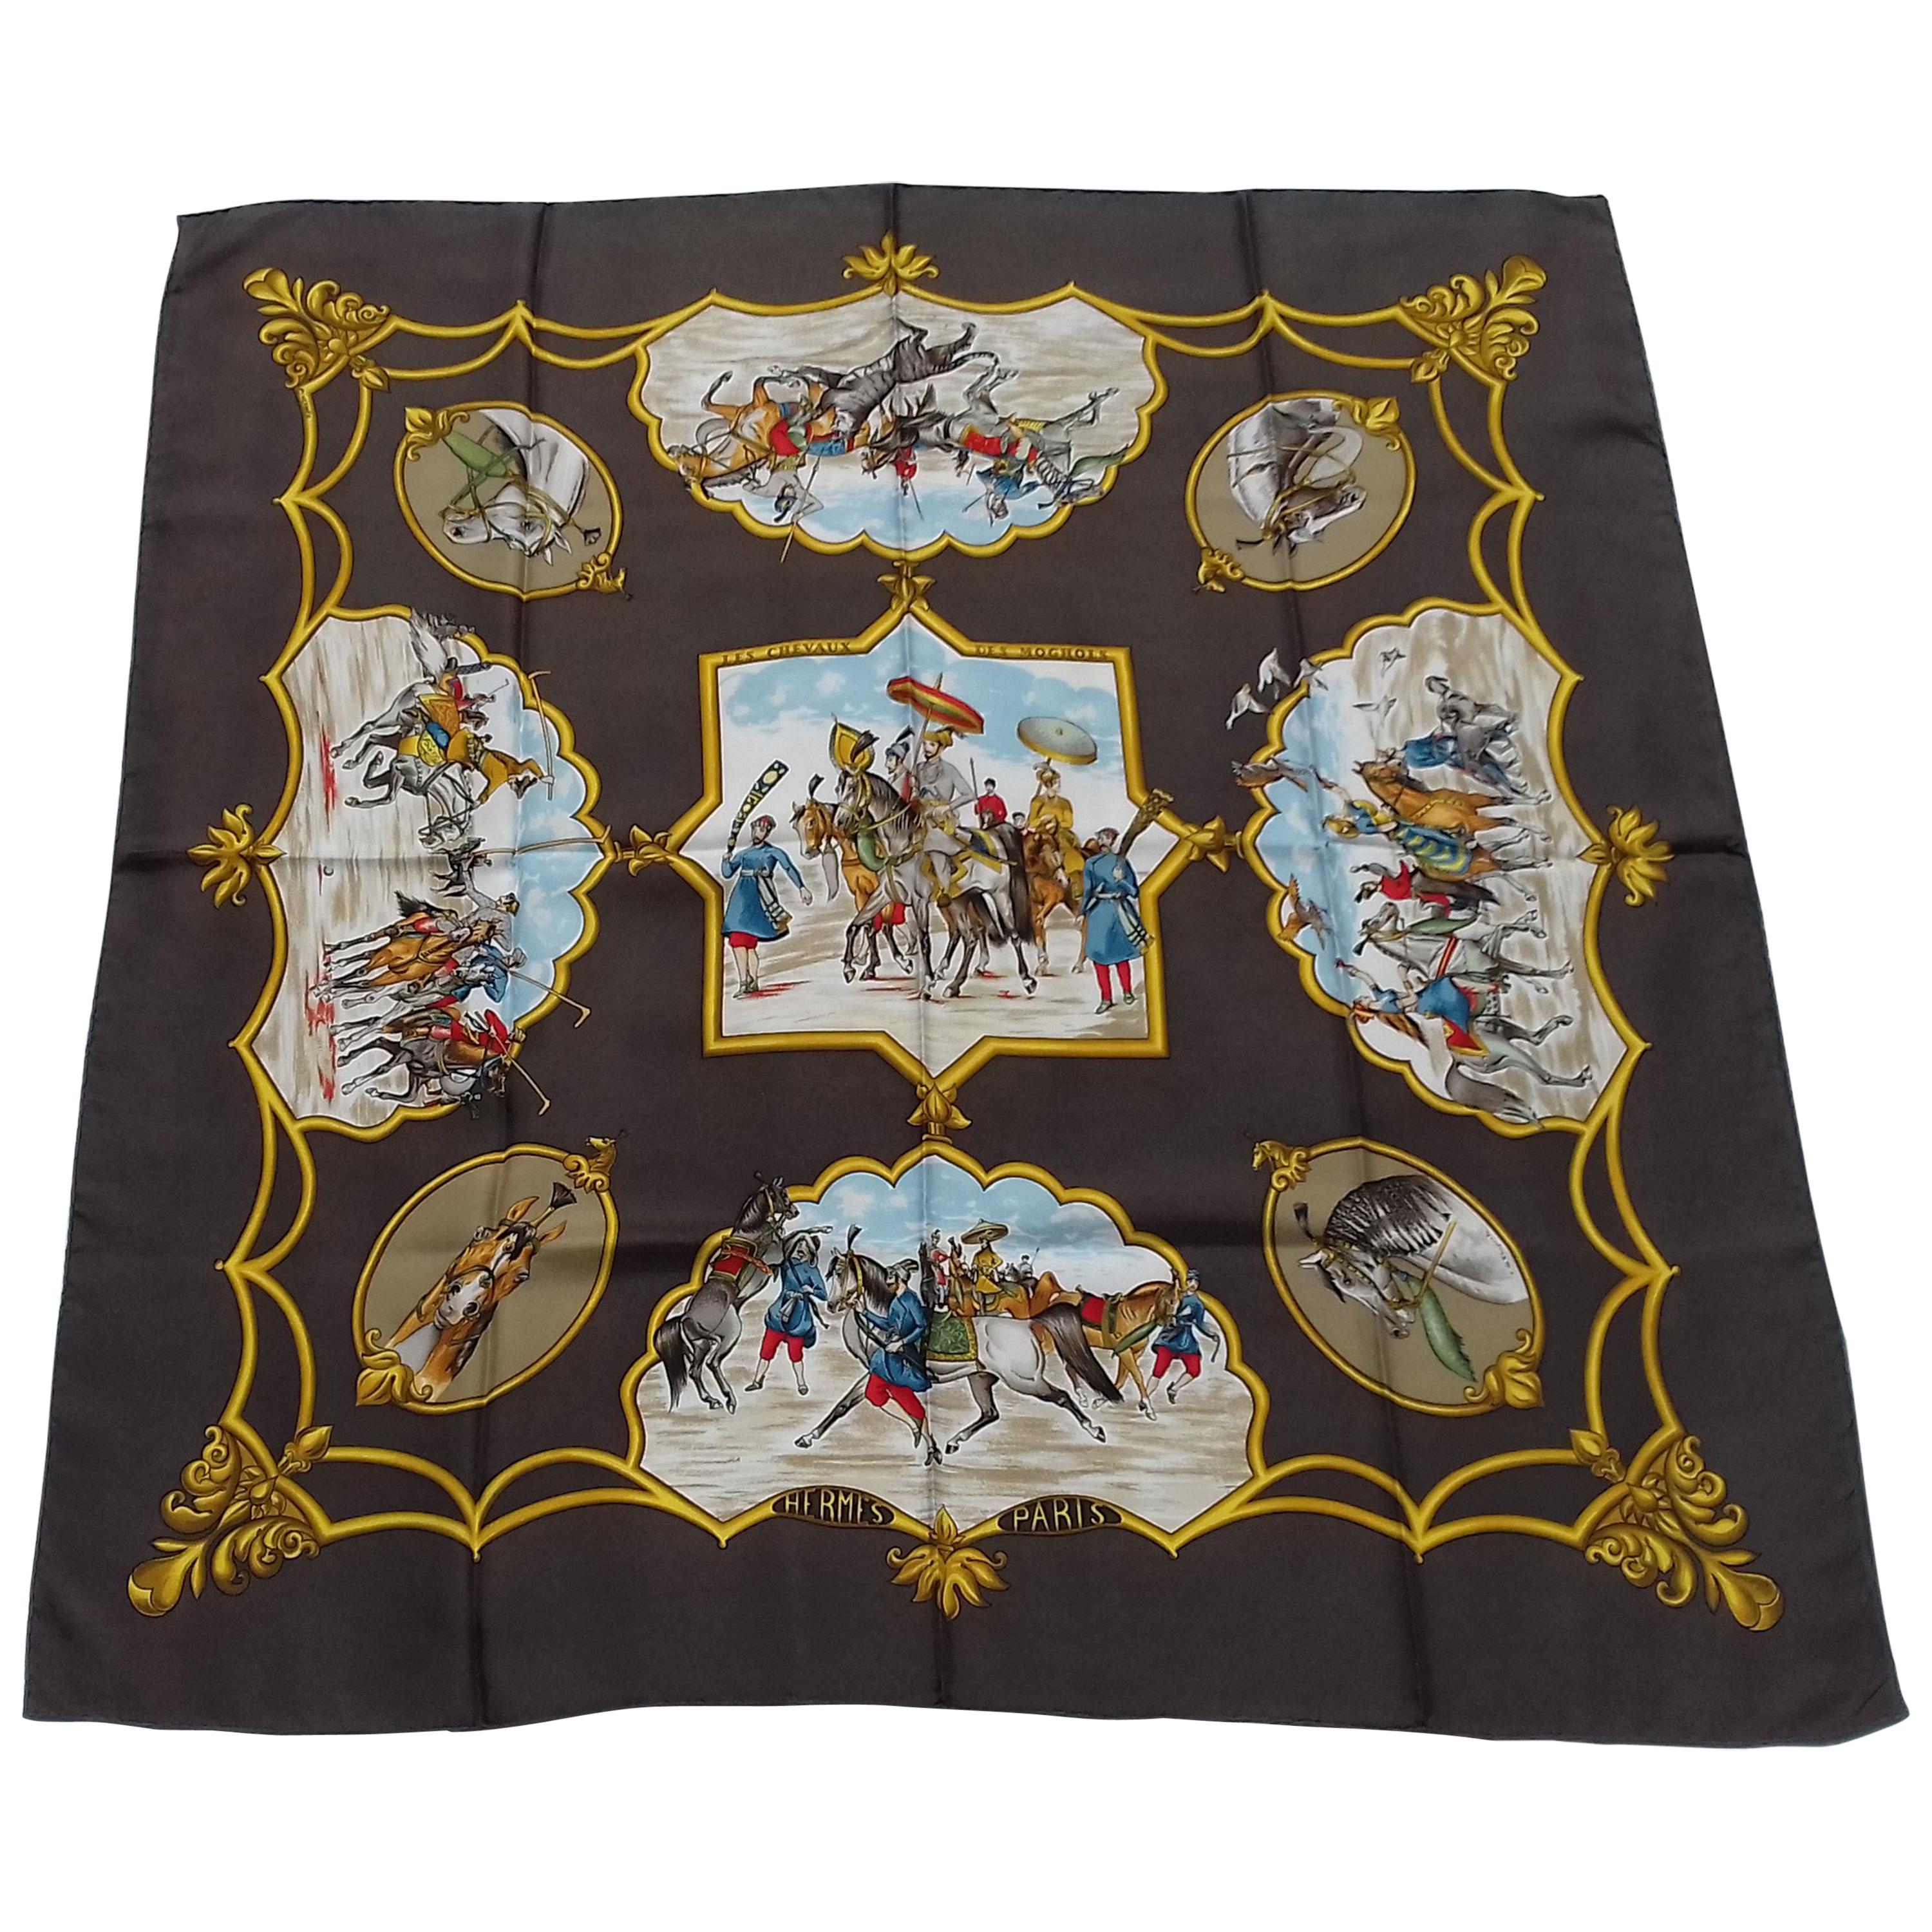 Rare and Beautiful Authentic Hermès Scarf

Print: 